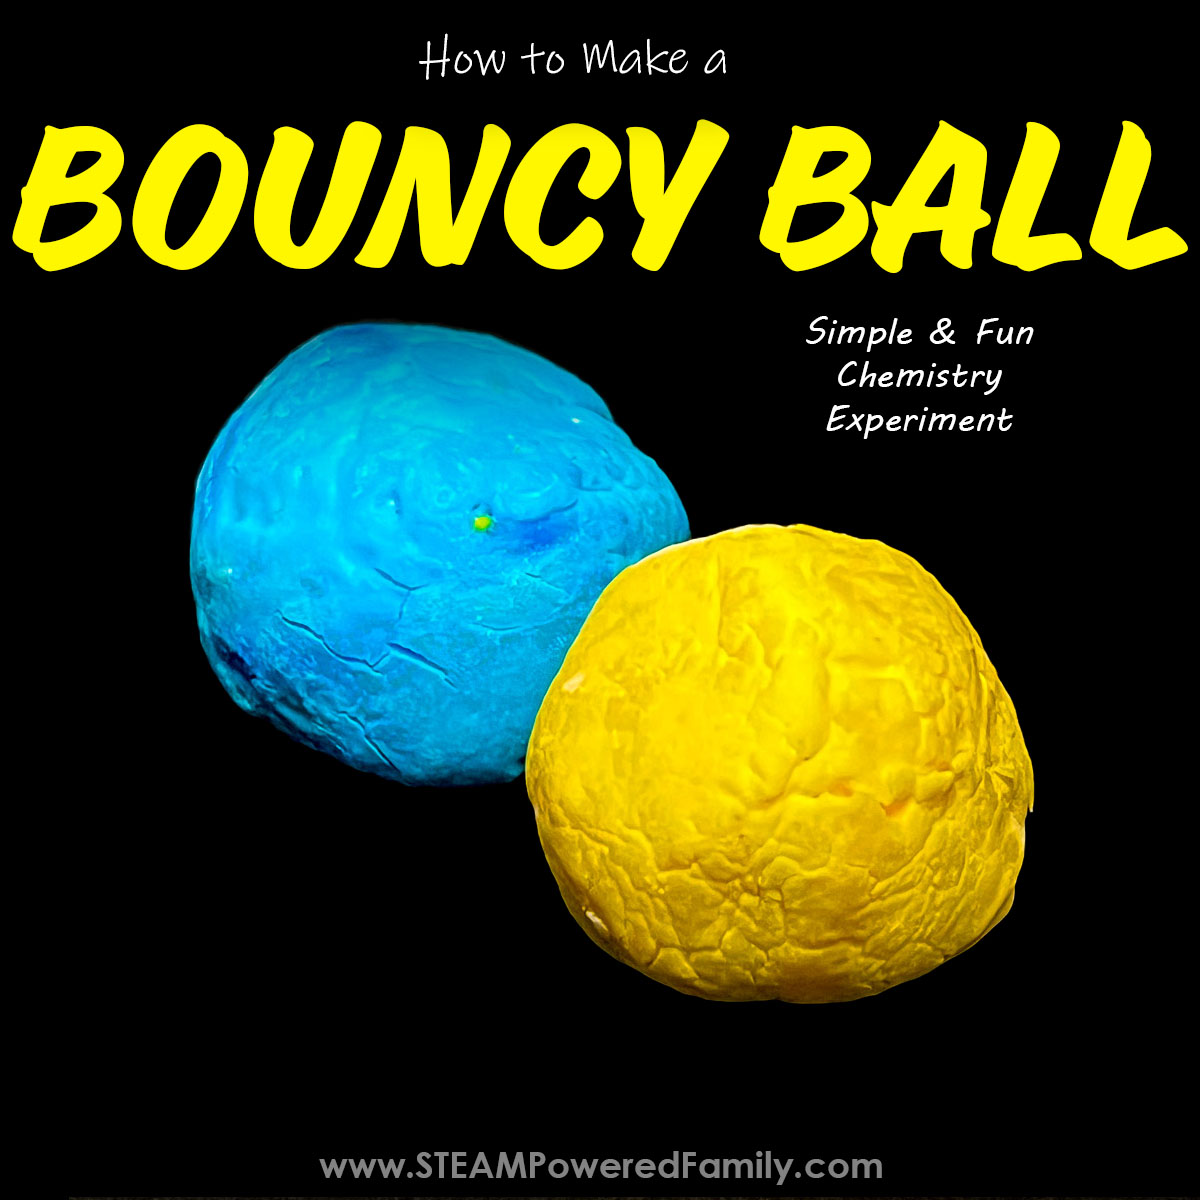 How to Make Bouncy Balls Experiment